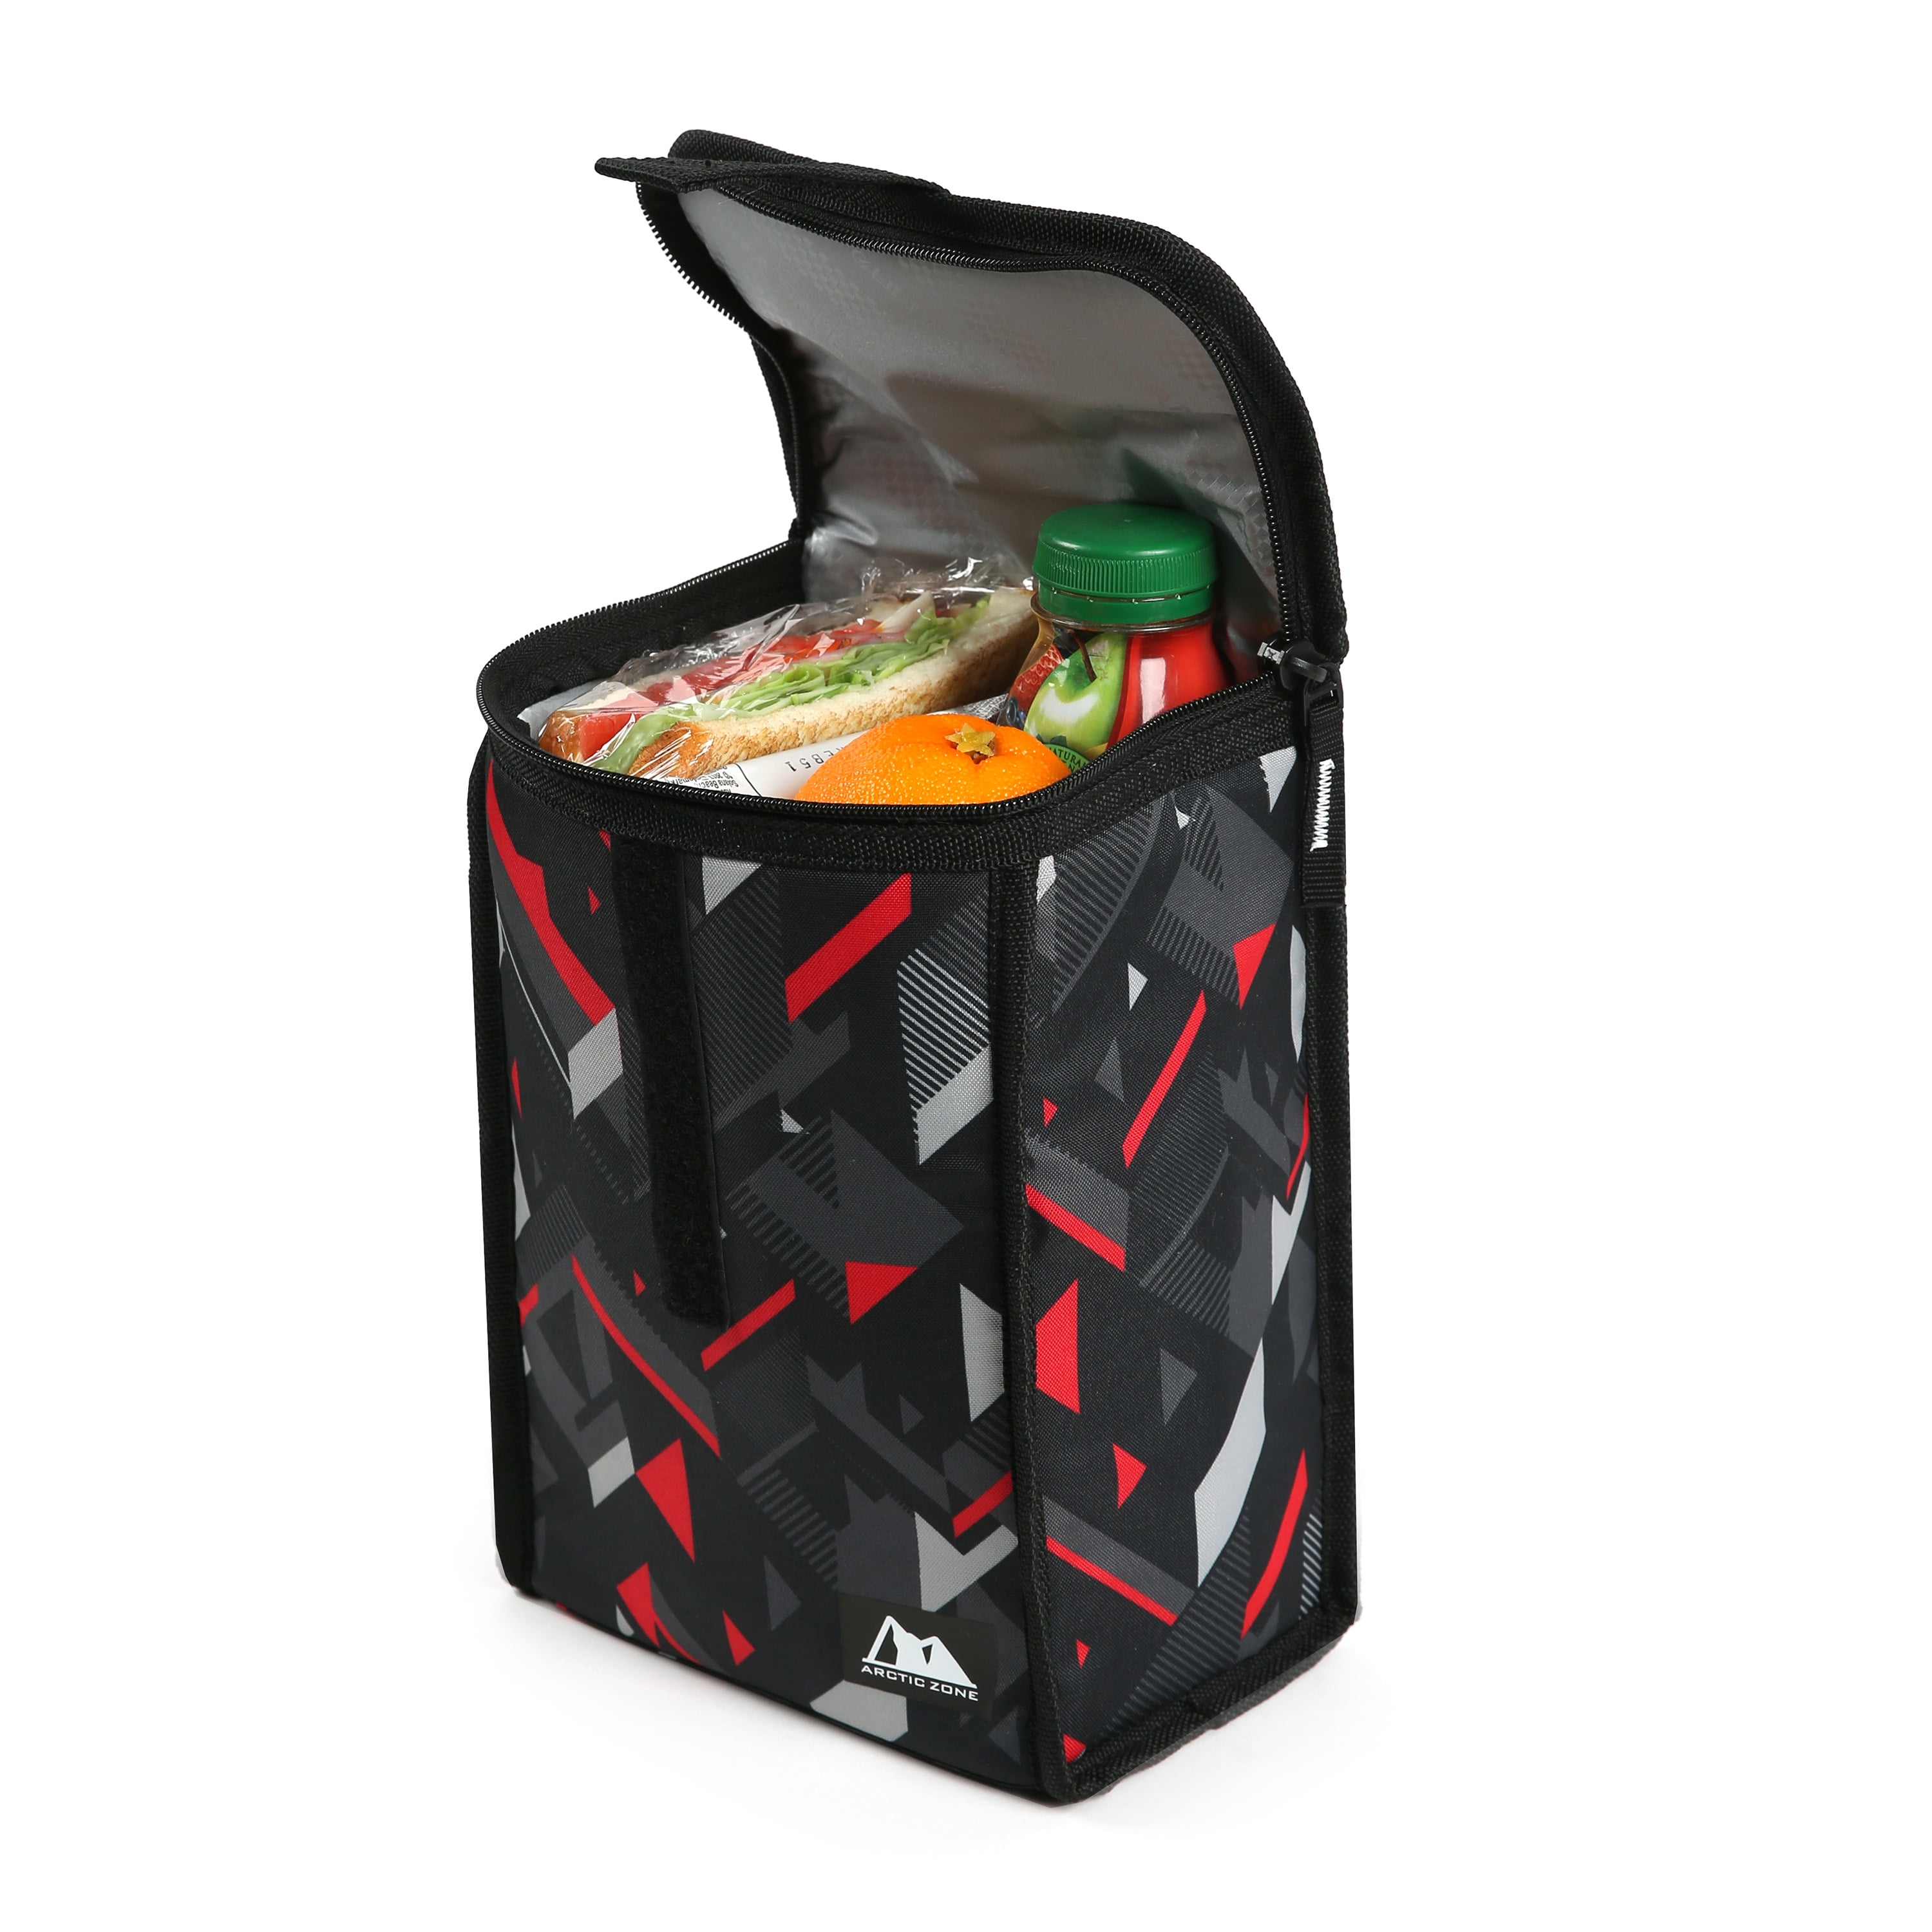 Arctic Zone Upright Lunch Box with Thermal Insulation, Tesseract Gray/Red 